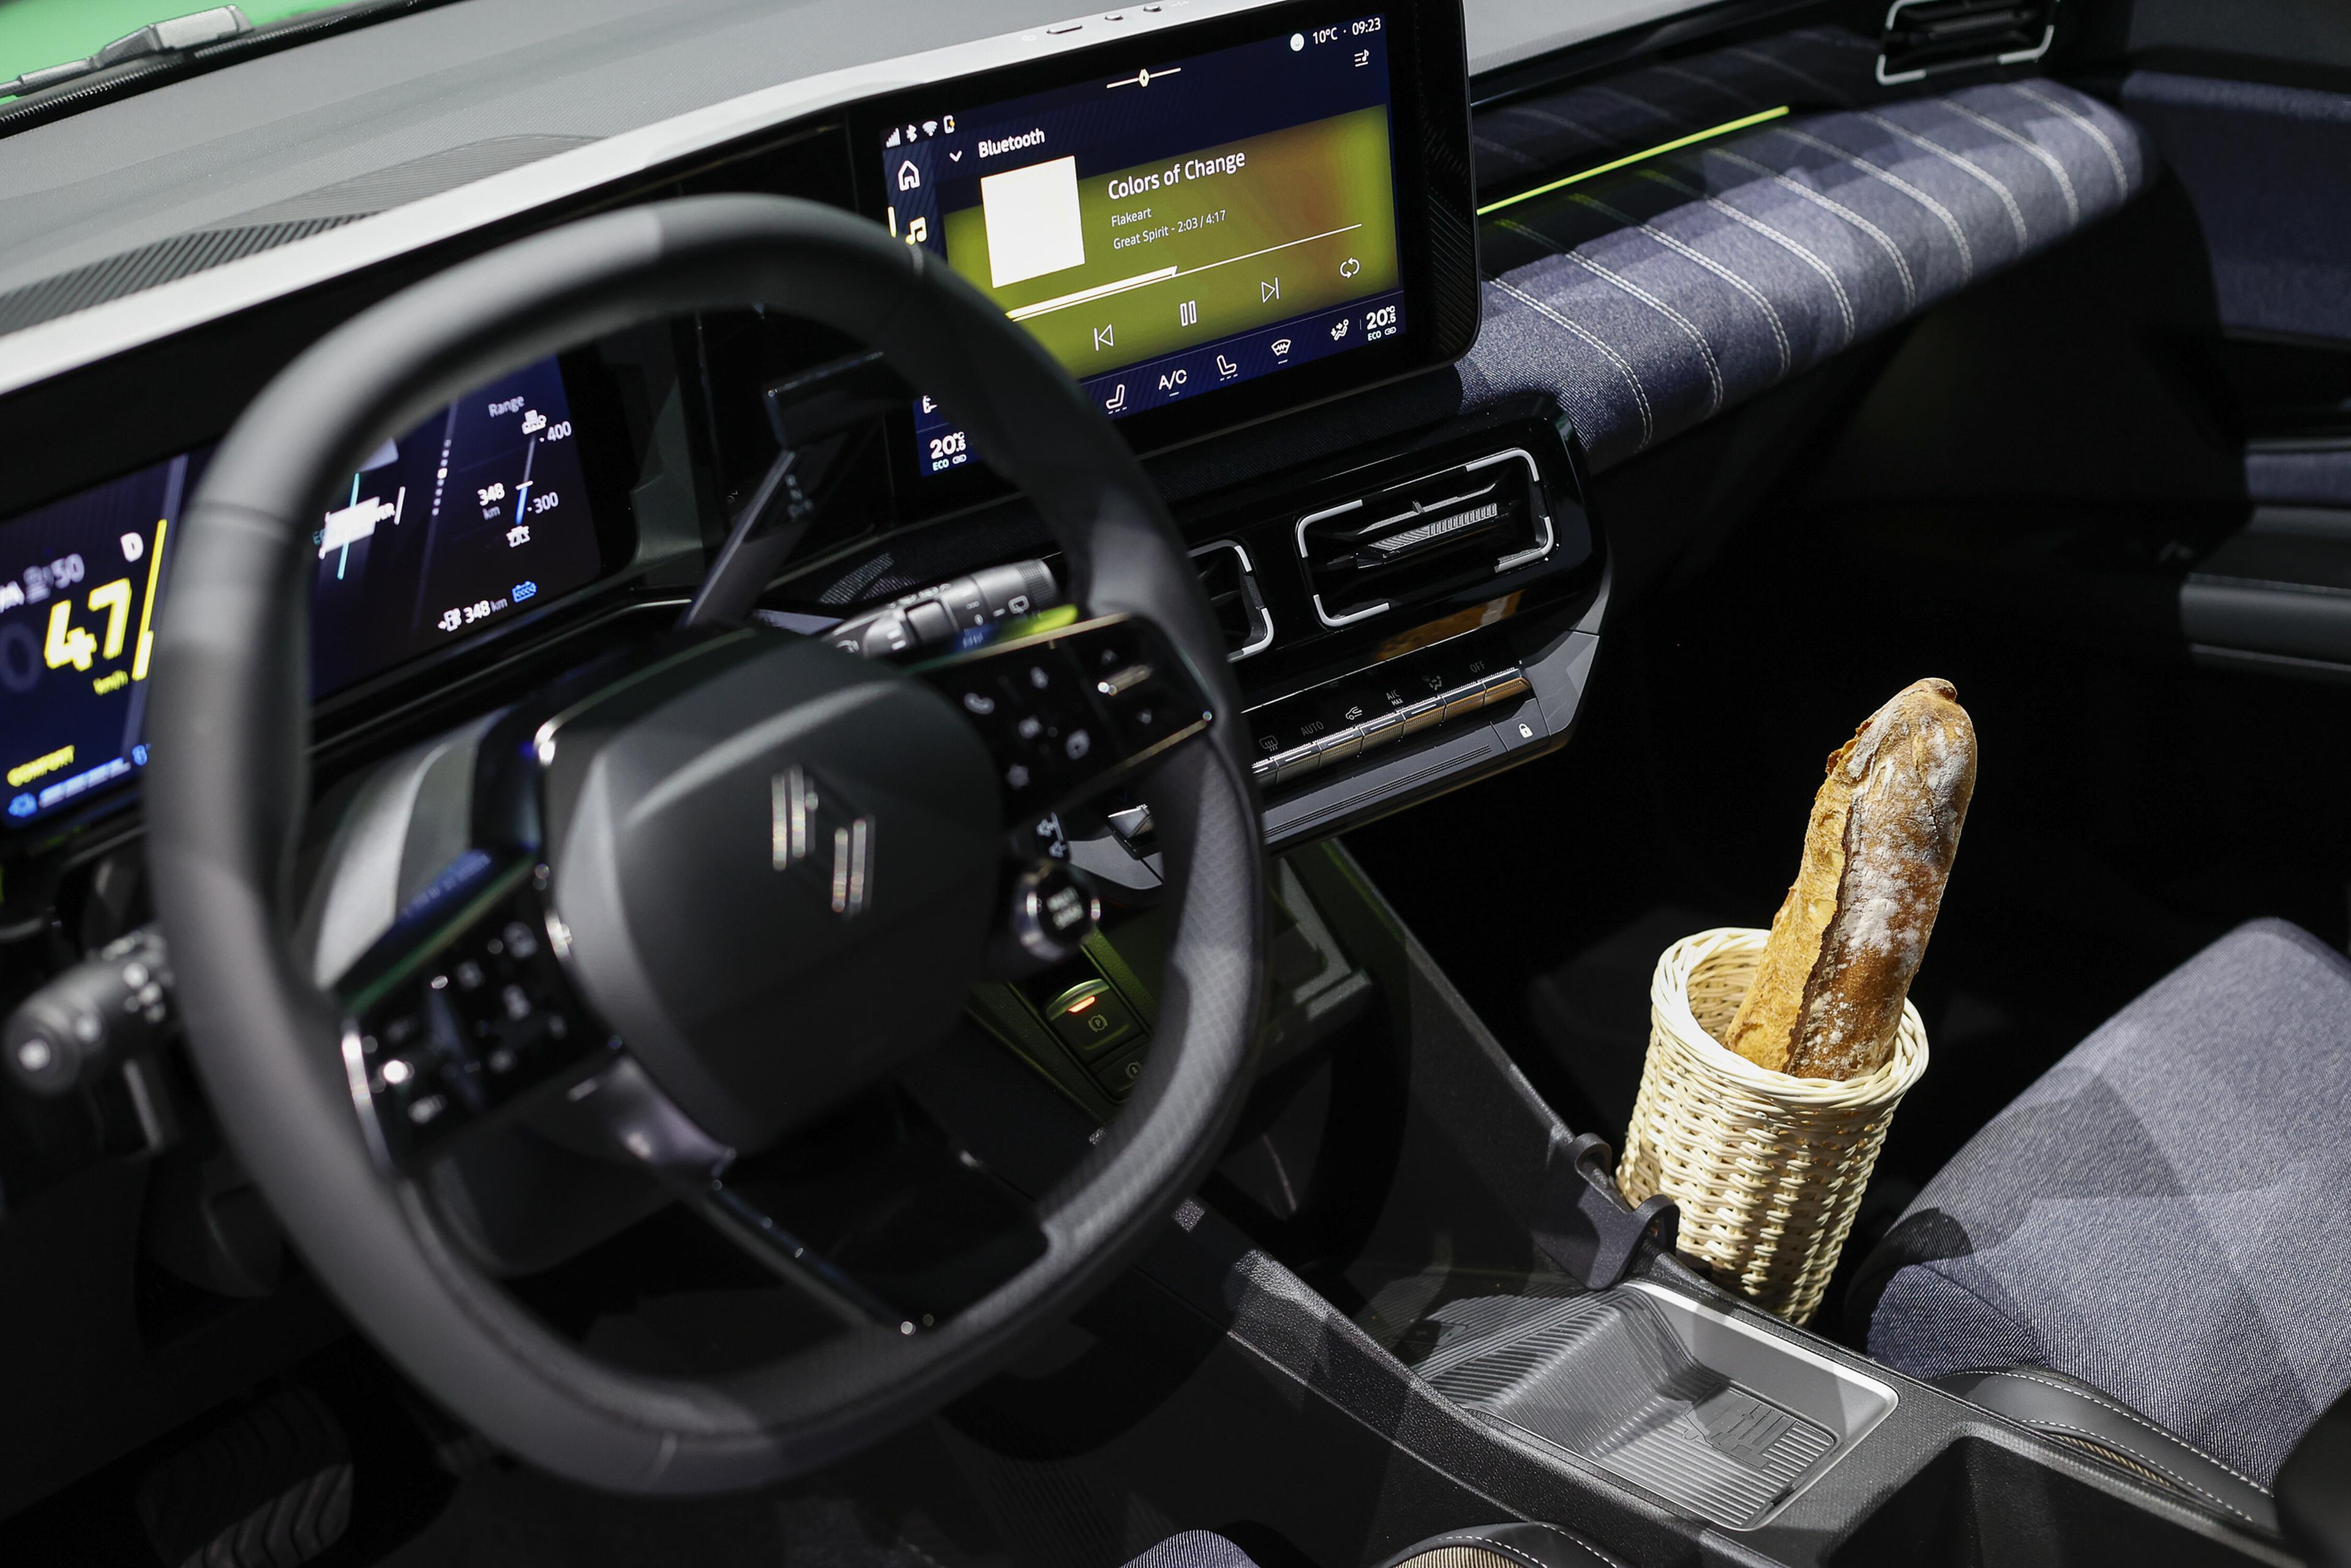 the interior of the new Renault 5 showing its baguette holder option